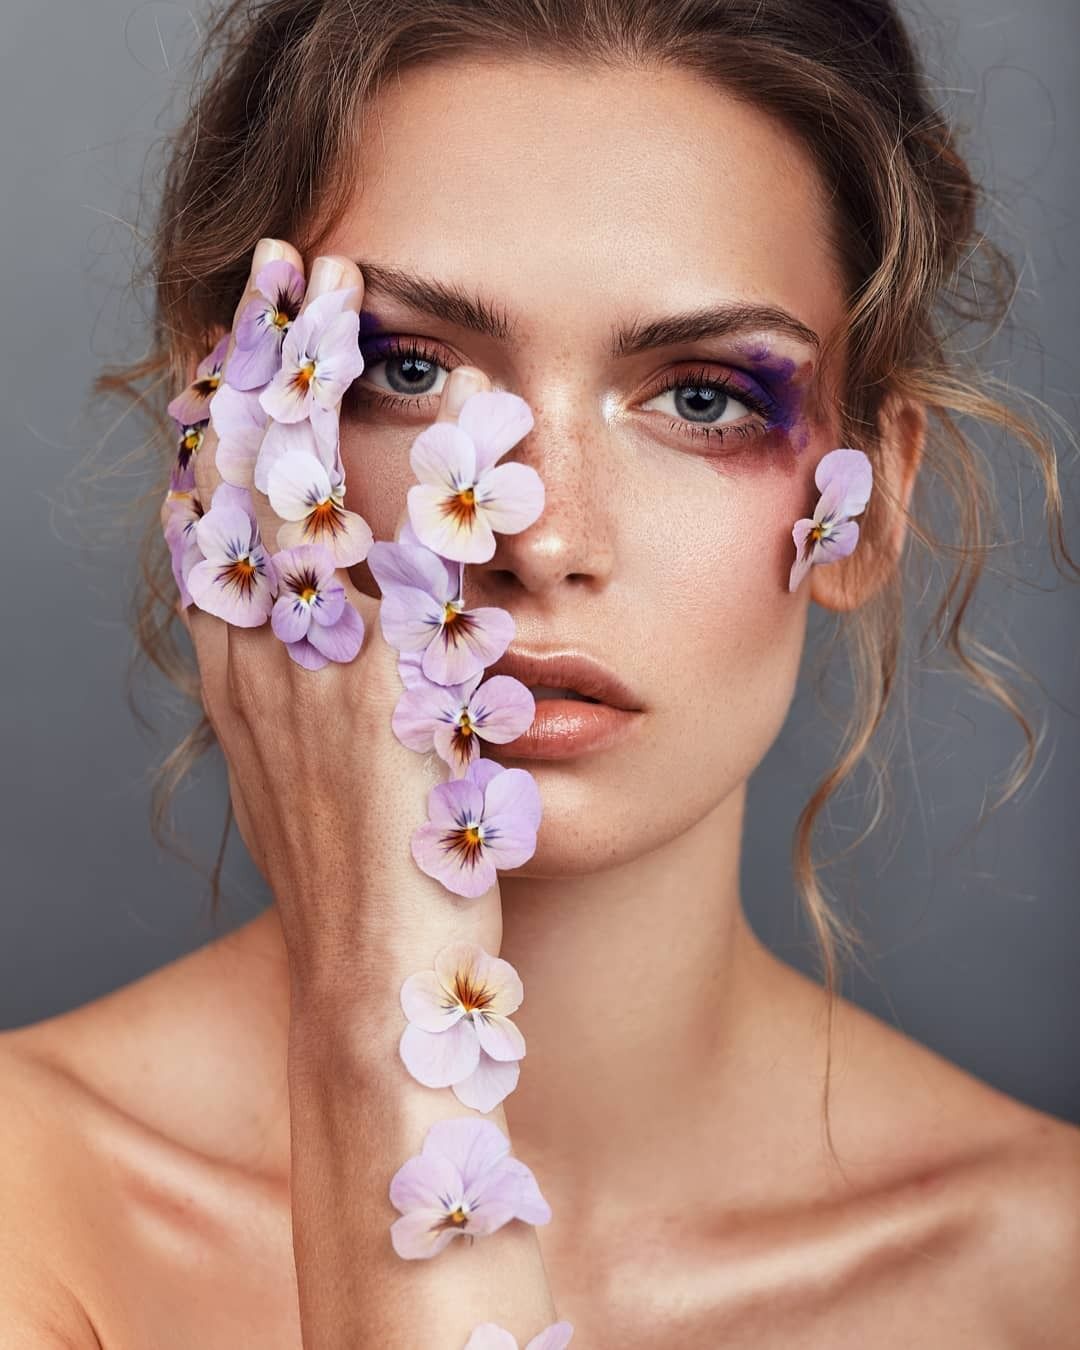 Our Favourite Models - Our Favourite Models -   13 beauty Photoshoot flowers ideas